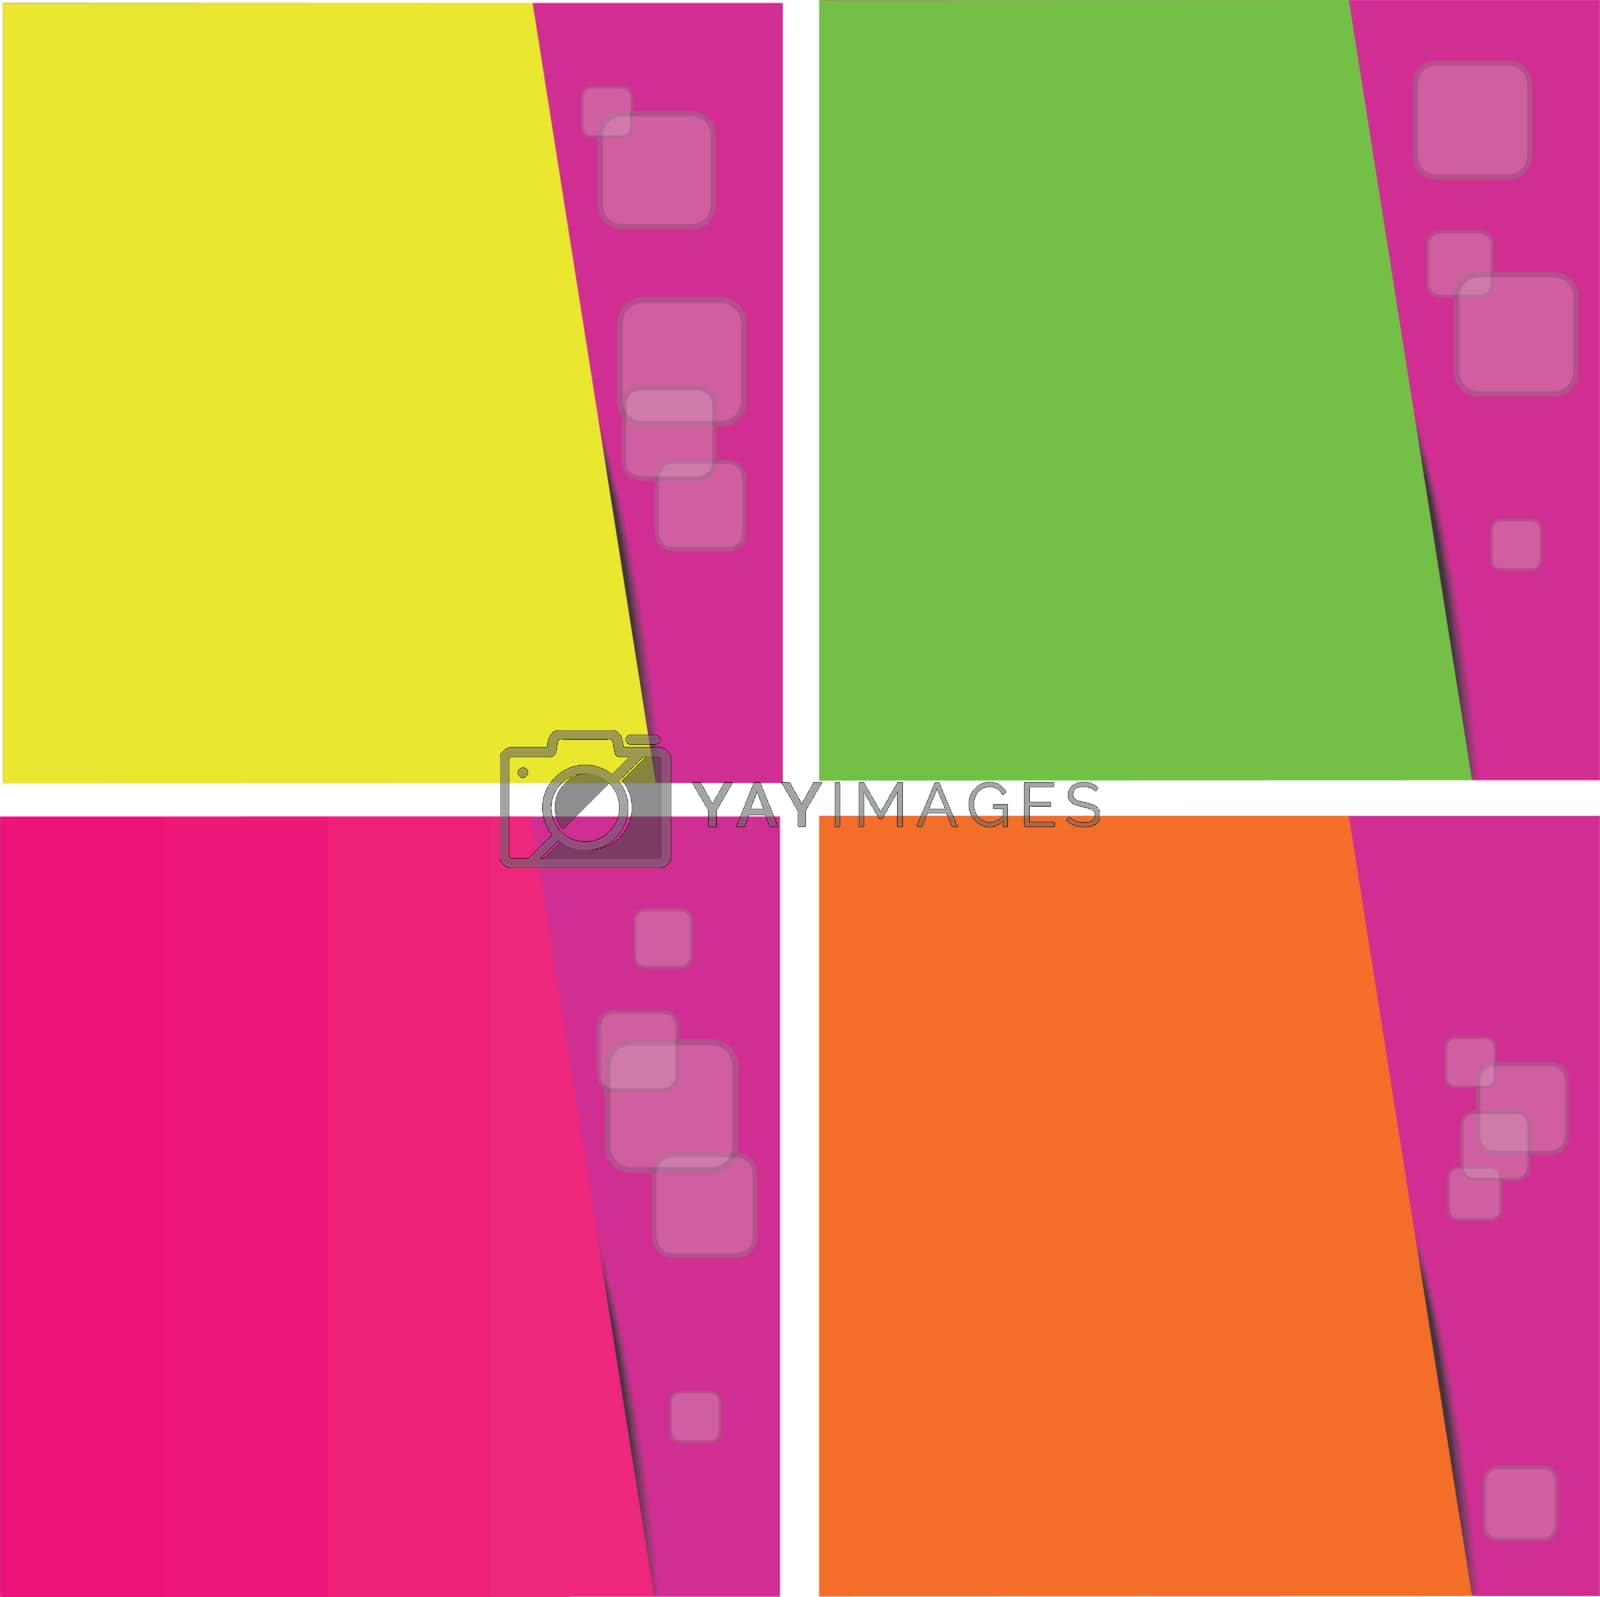 Royalty free image of Vivid vector reminder notes by Mysteriousman